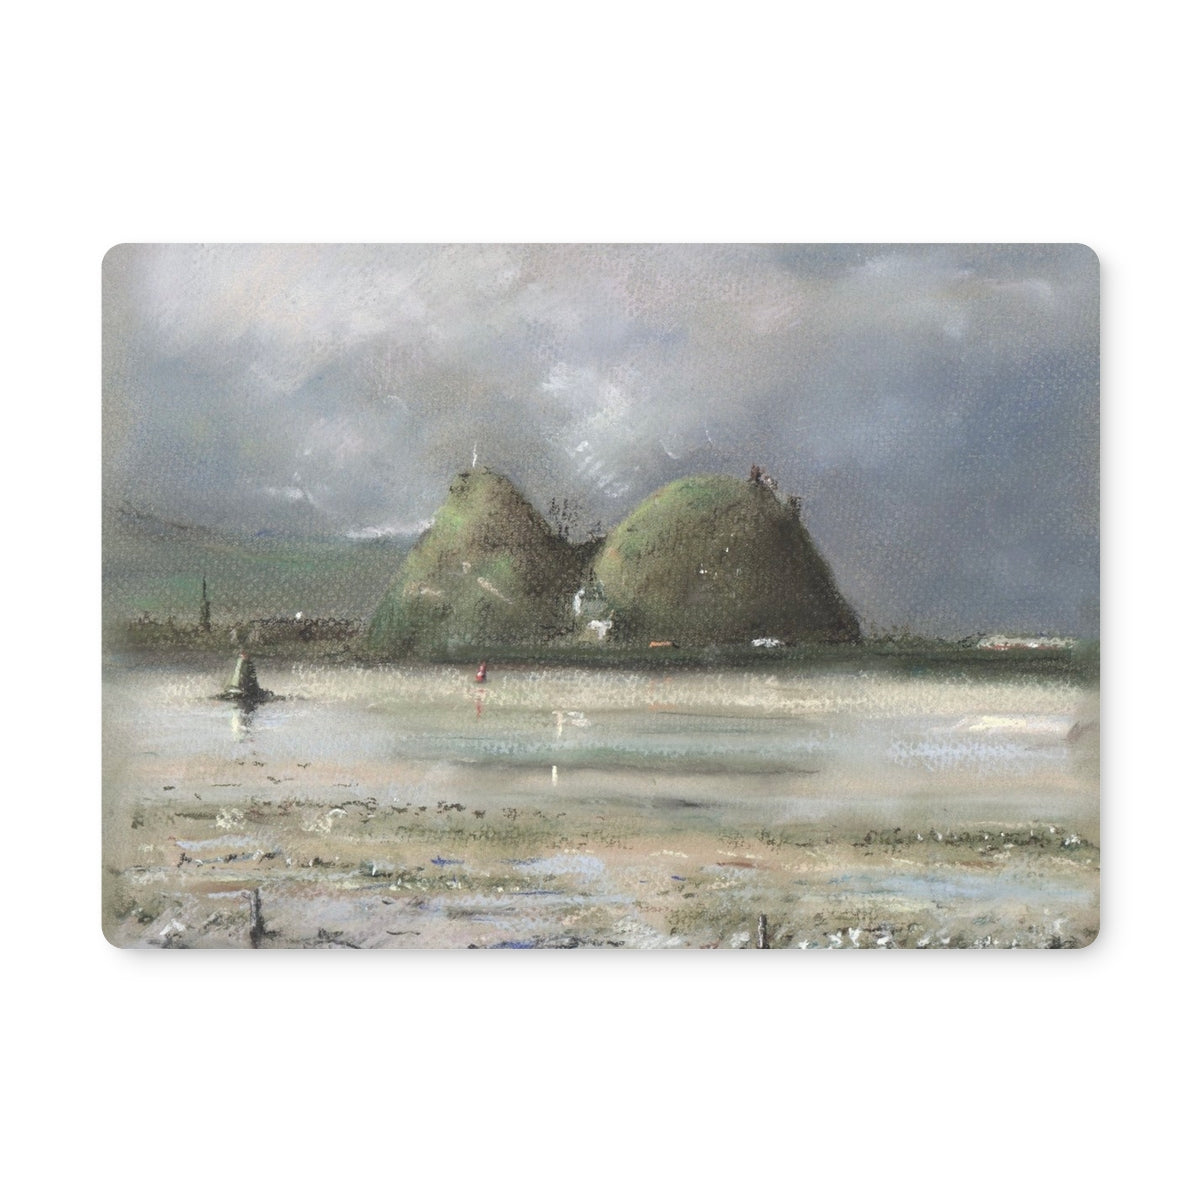 Dumbarton Rock Art Gifts Placemat-Placemats-River Clyde Art Gallery-Single Placemat-Paintings, Prints, Homeware, Art Gifts From Scotland By Scottish Artist Kevin Hunter